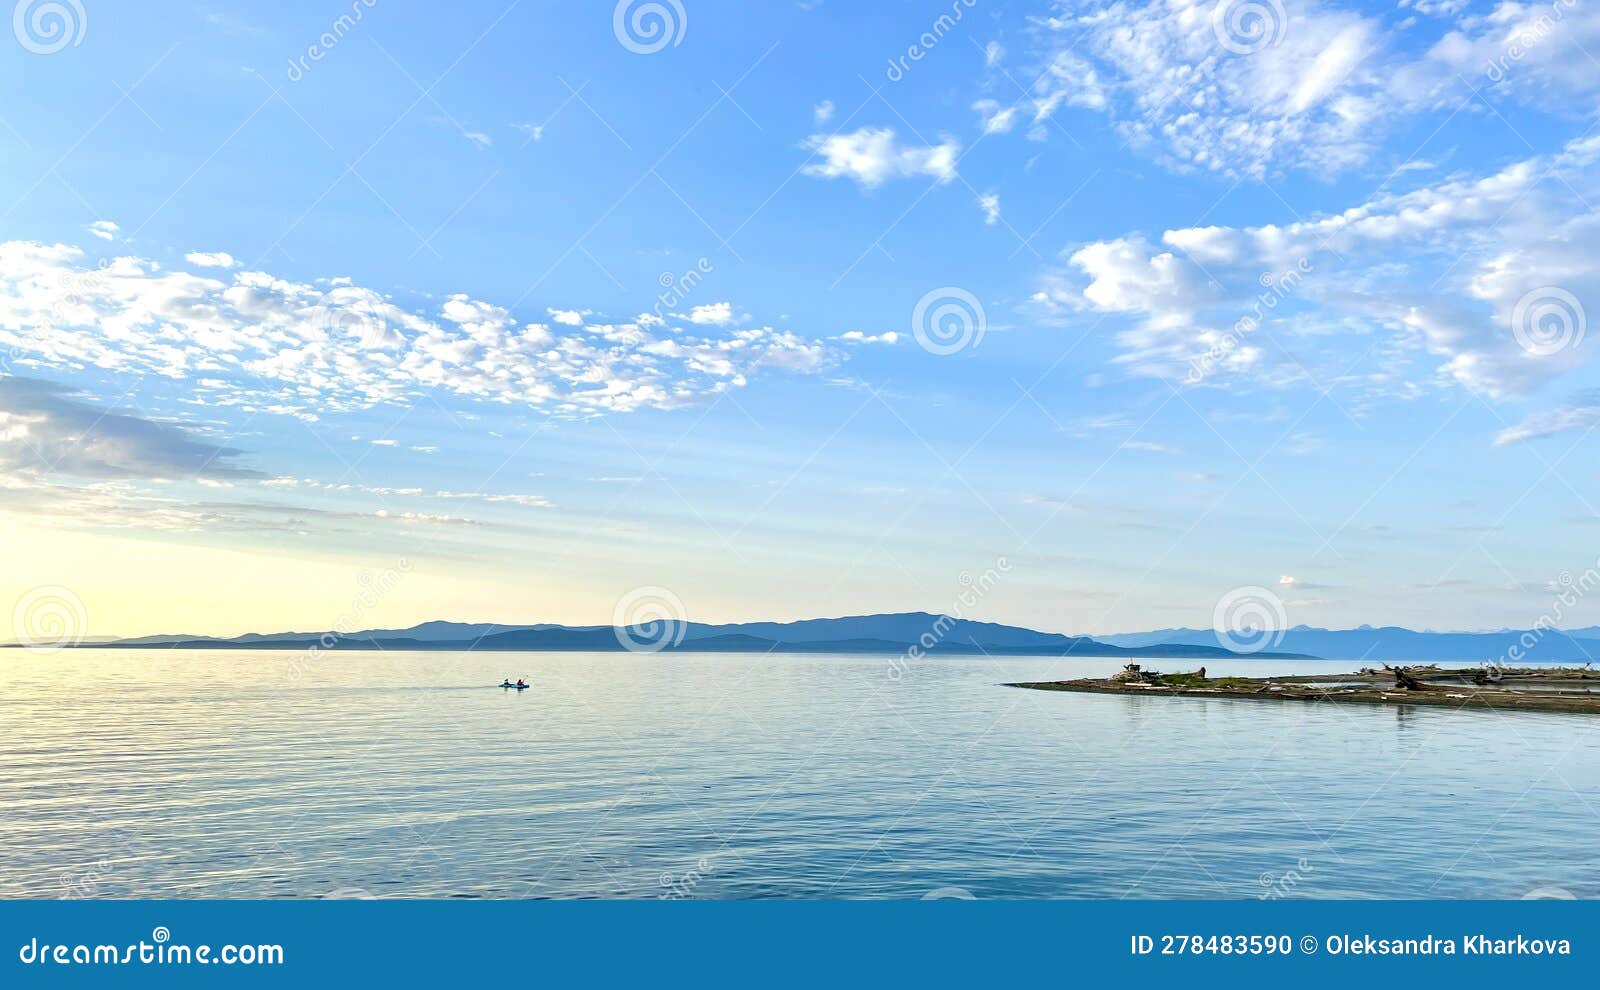 background for advertising travel to the sea or ocean only sky and water horizon light blue ocean and yellow sunset